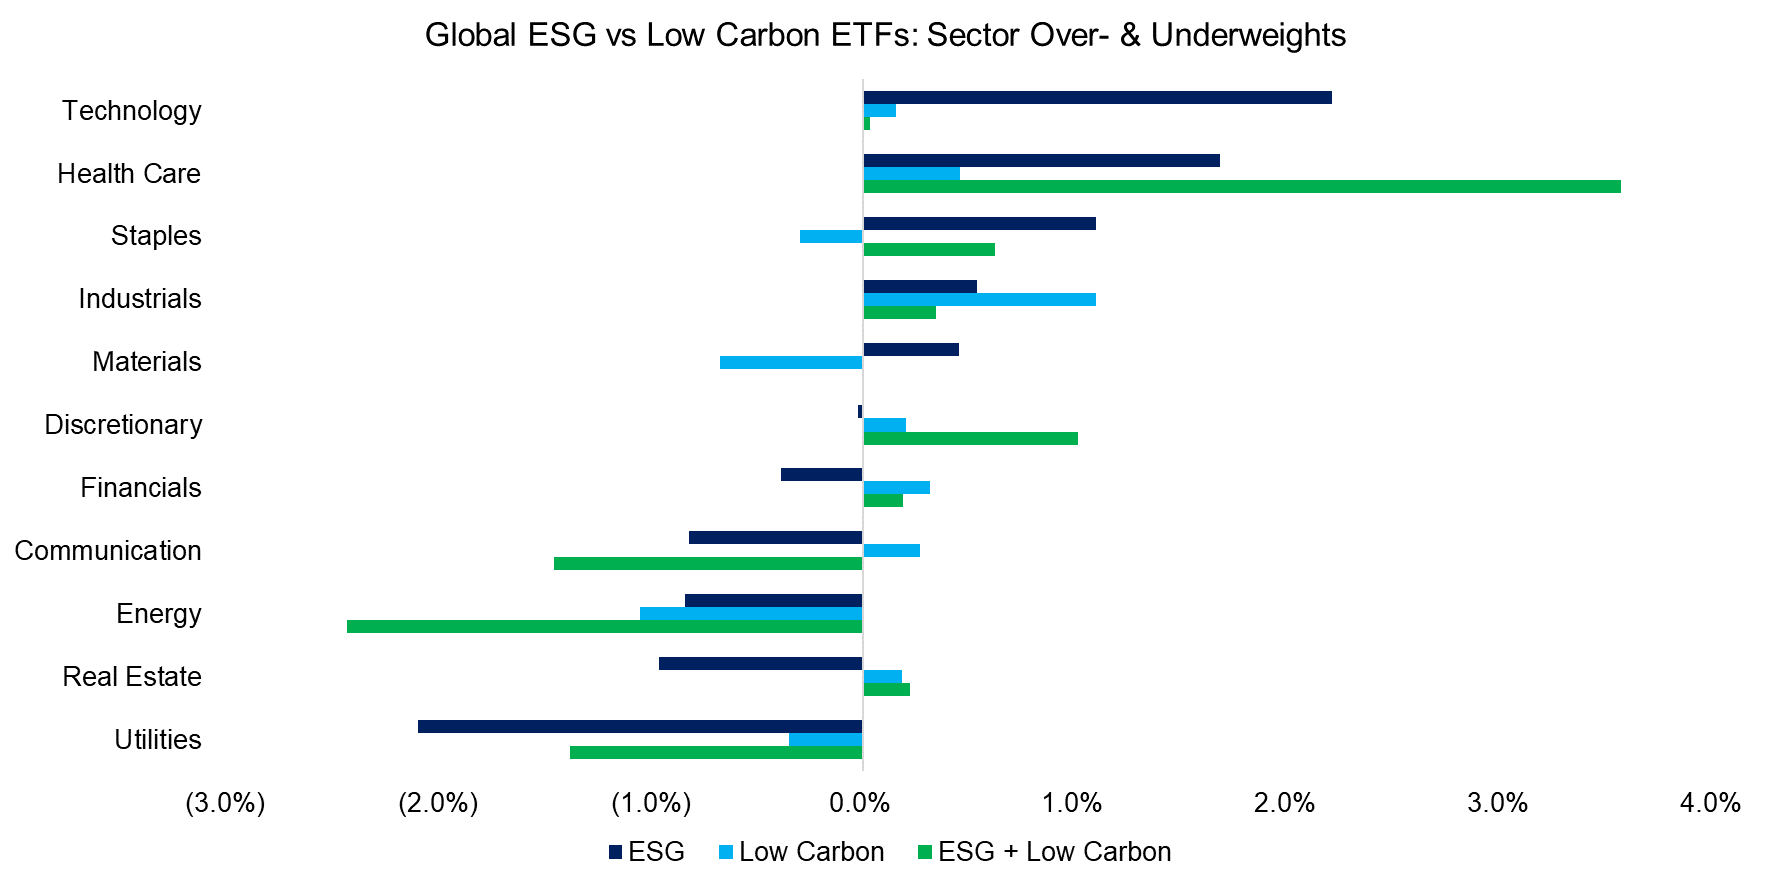 US ESG vs Low Carbon ETFs Sector Over- & Underweights